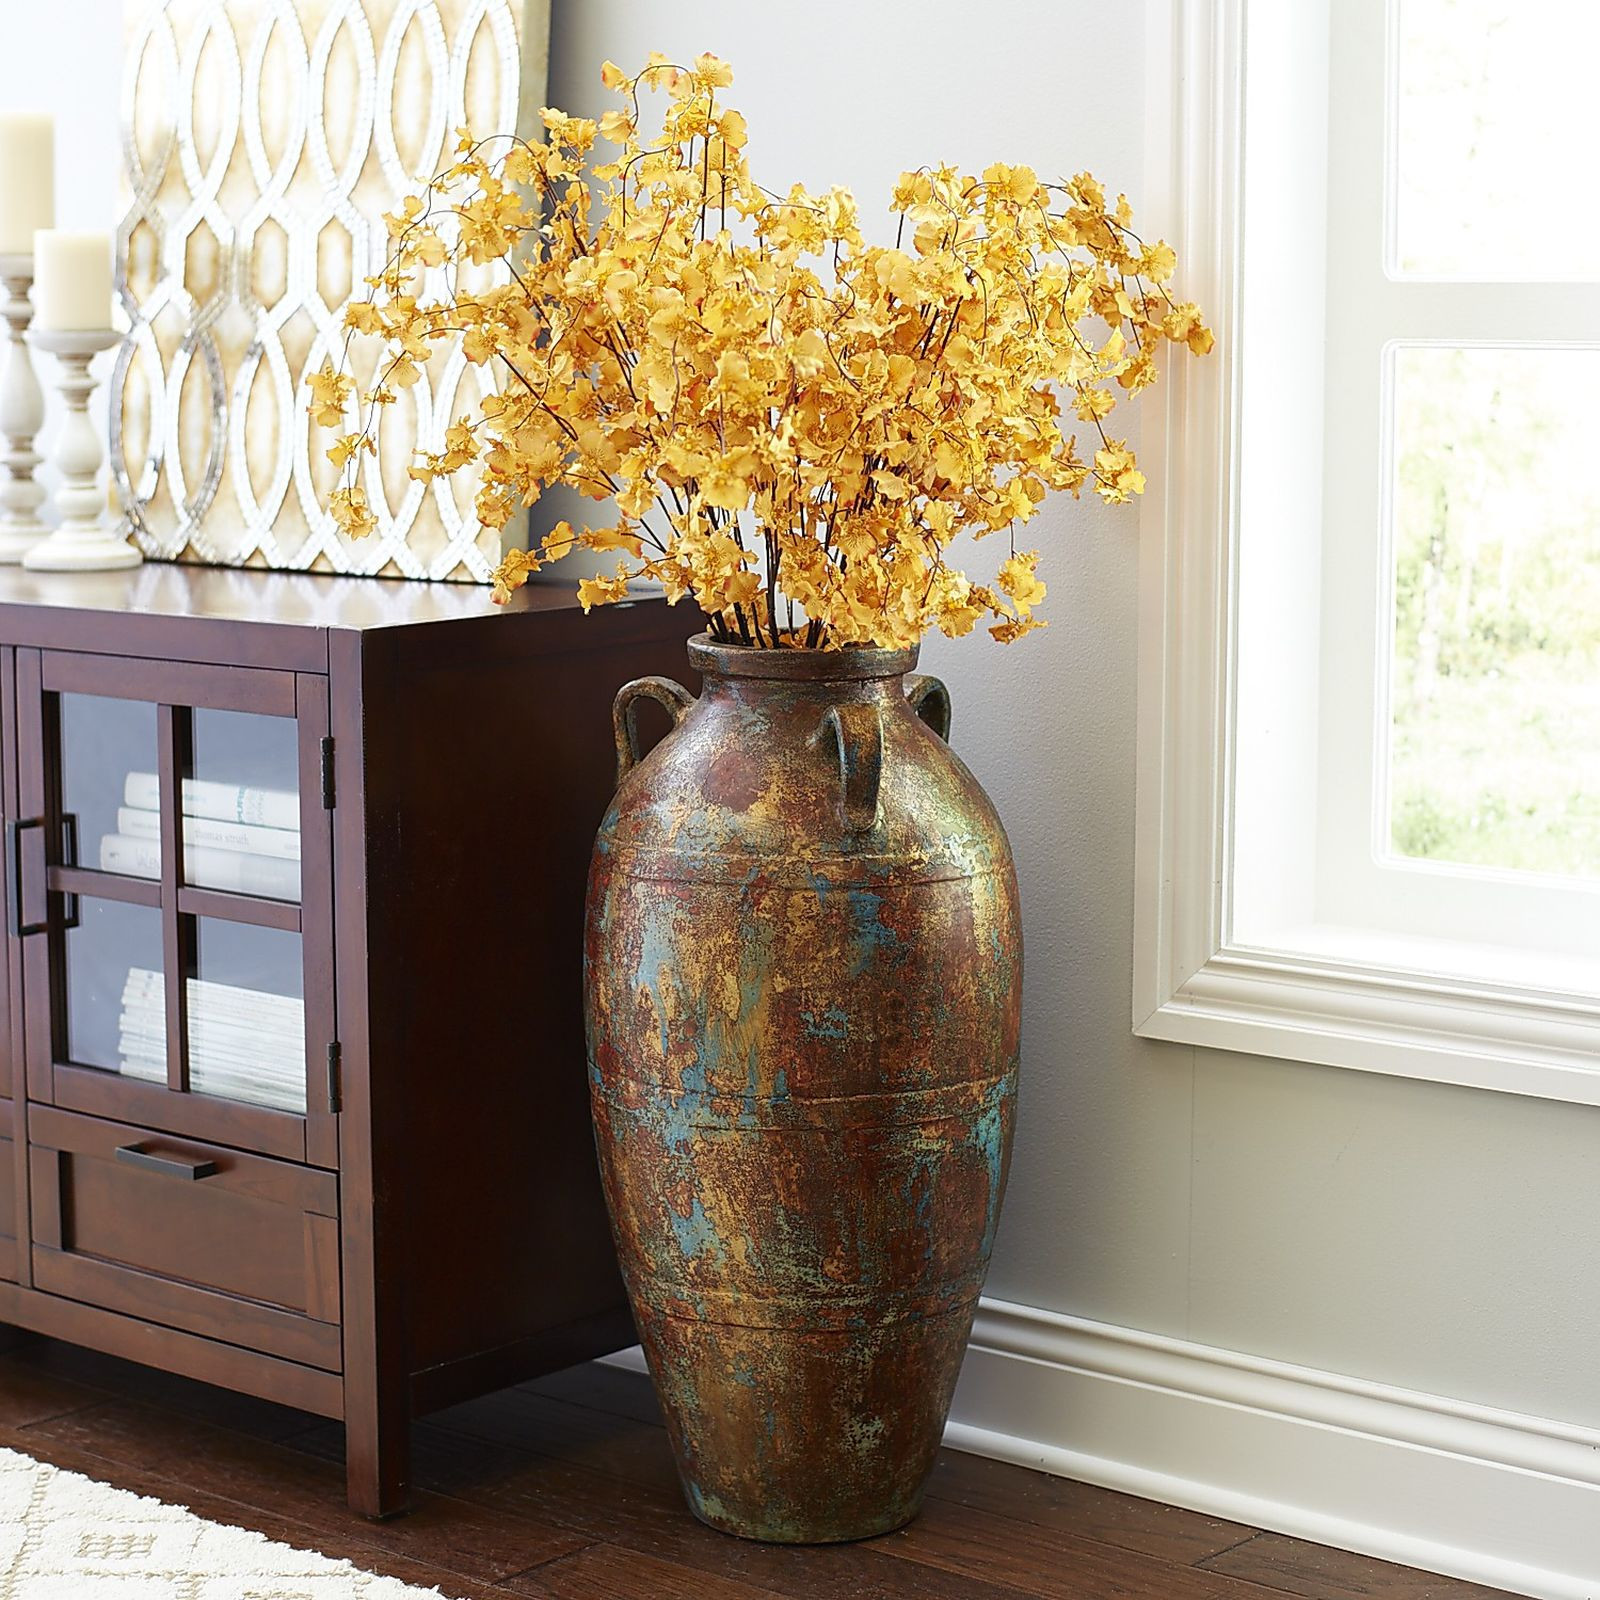 Modern Floor Vase Decoration Ideas for Small Space